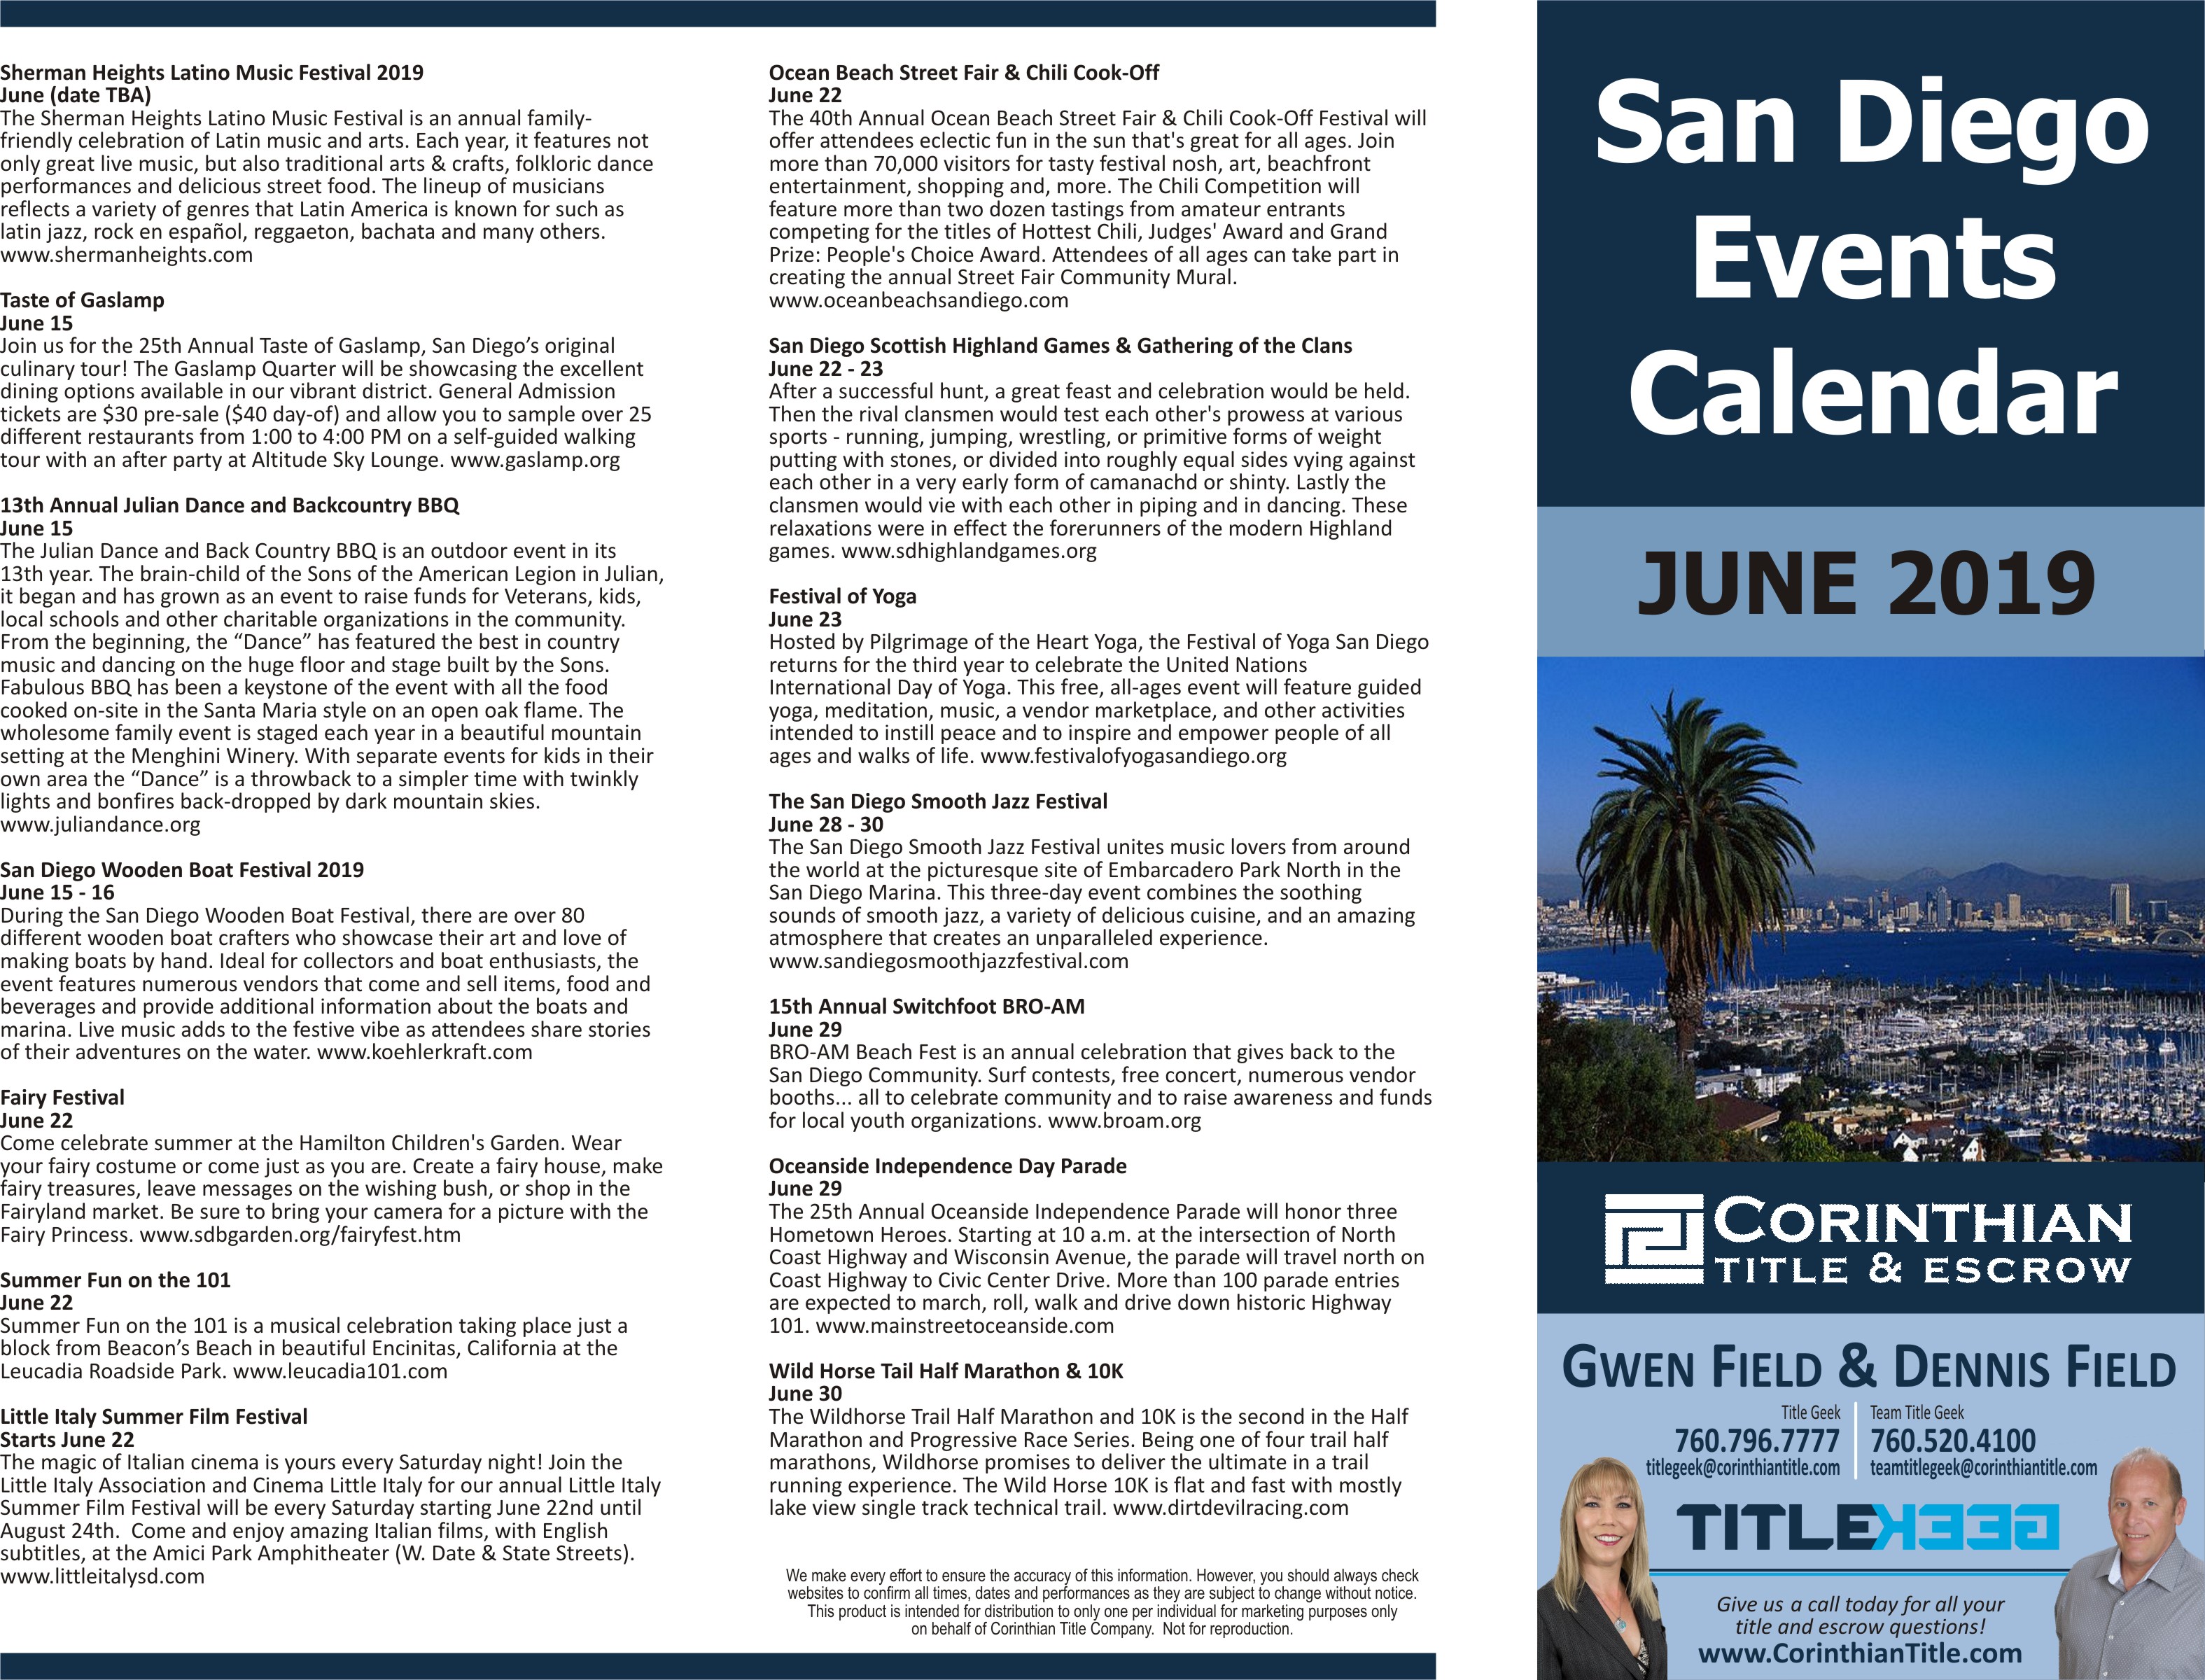 June 2019 San Diego County Calendar of Events North County San Diego